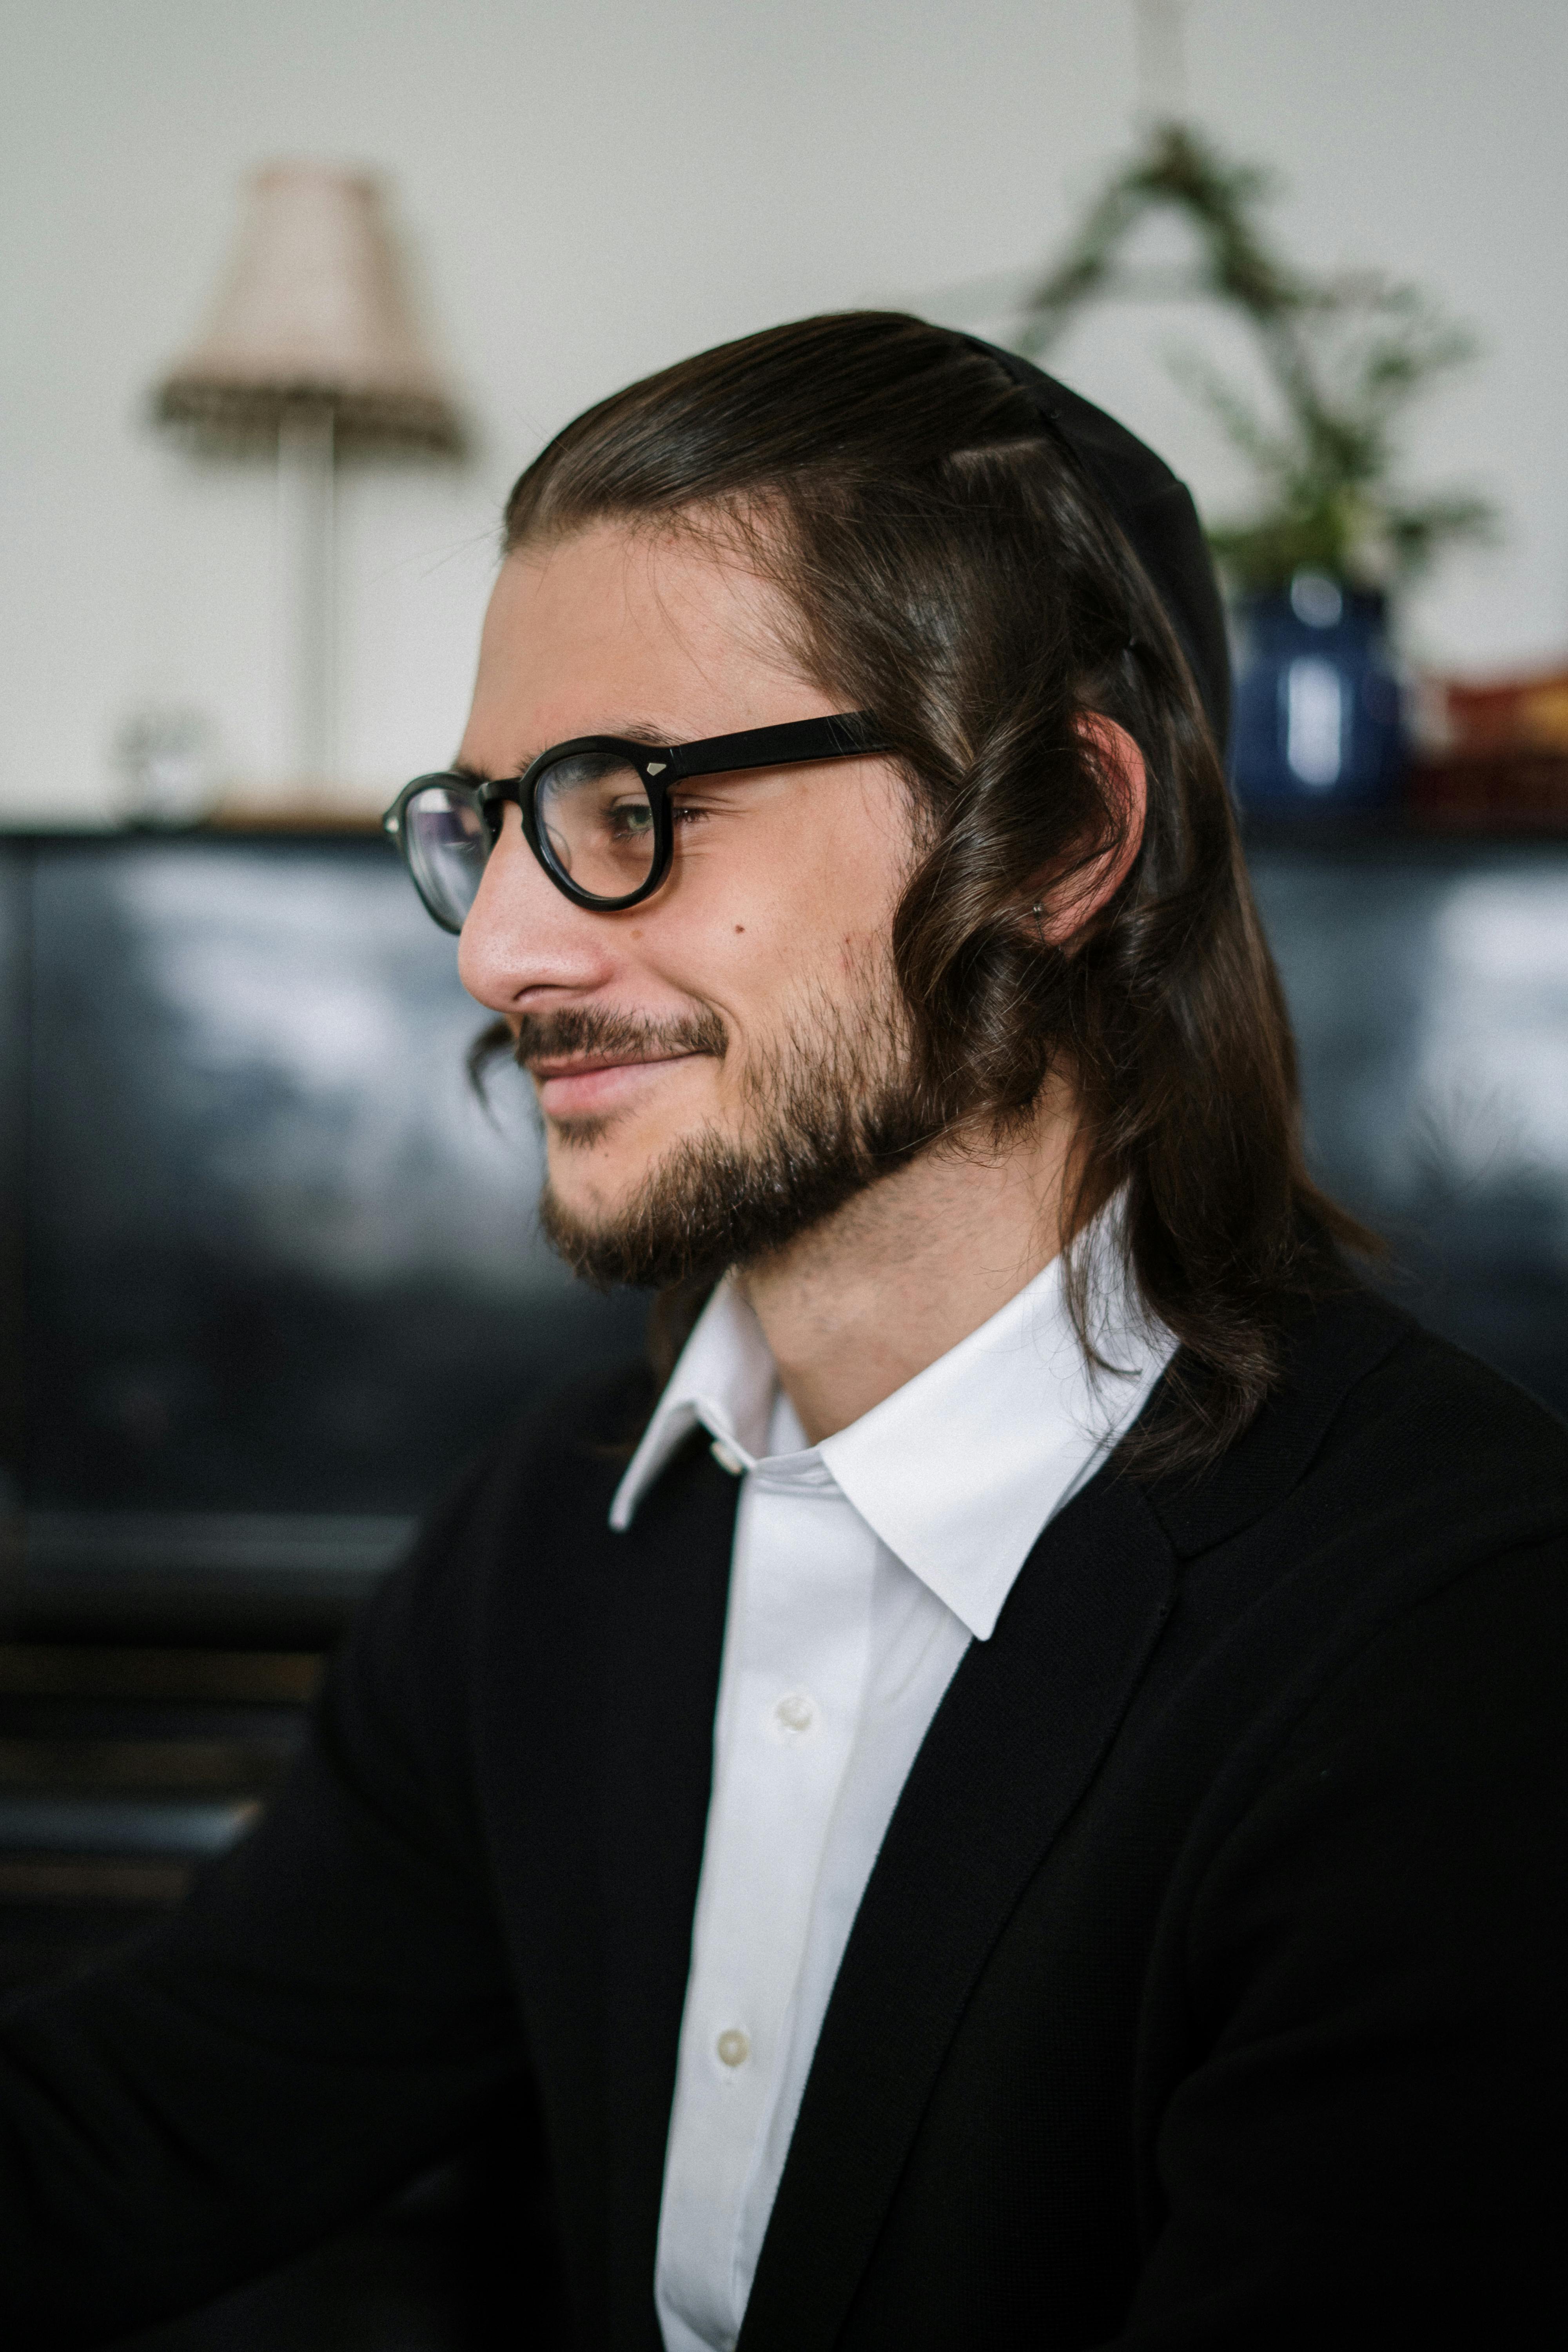 Bearded Man with Long Hair and Glasses · Free Stock Photo